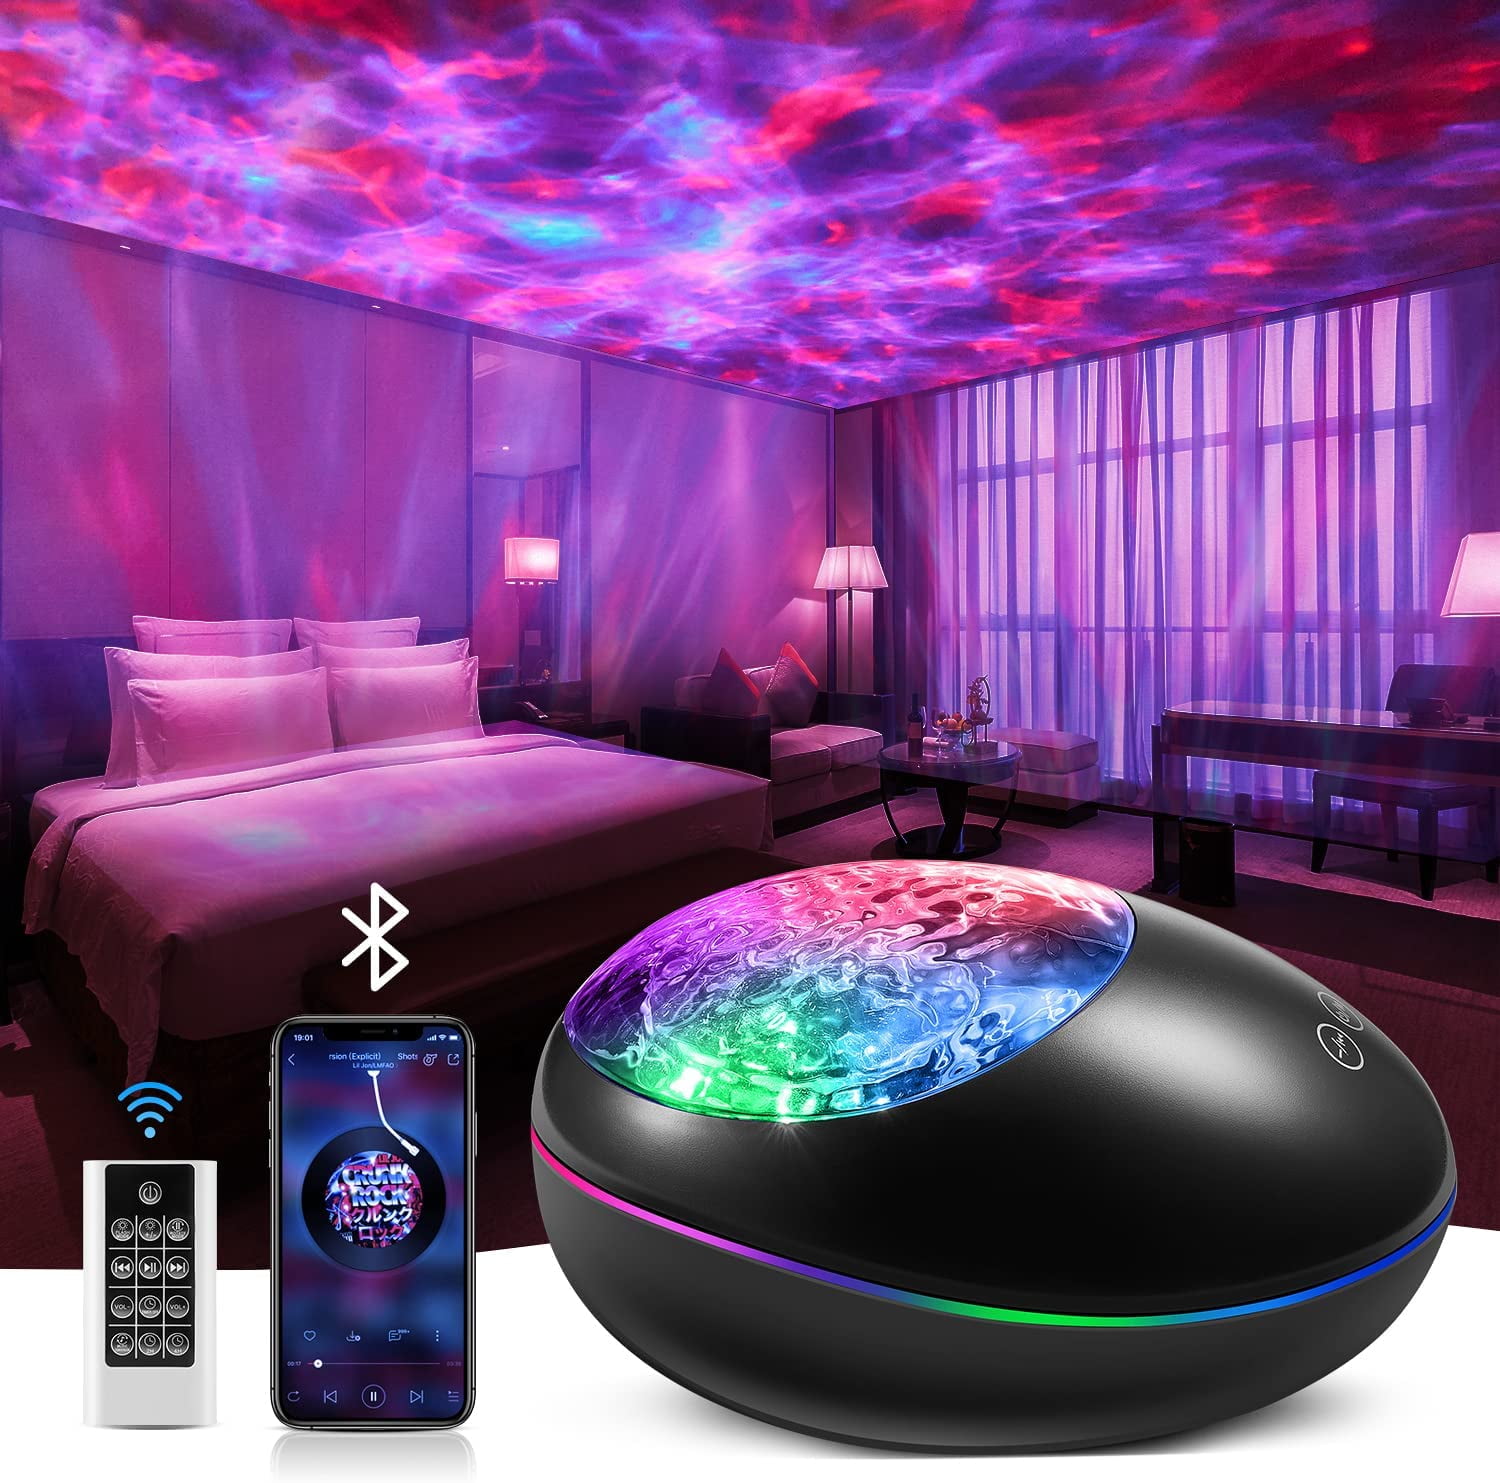 Voice&Remote Best Gift for Galaxy Light Projector for Bedroom Theatre/Game Rooms Sky Nebula/Moving Ocean Wave Party with Bluetooth Speaker Star Projector Night Light for Ceiling for Adults and Kids 